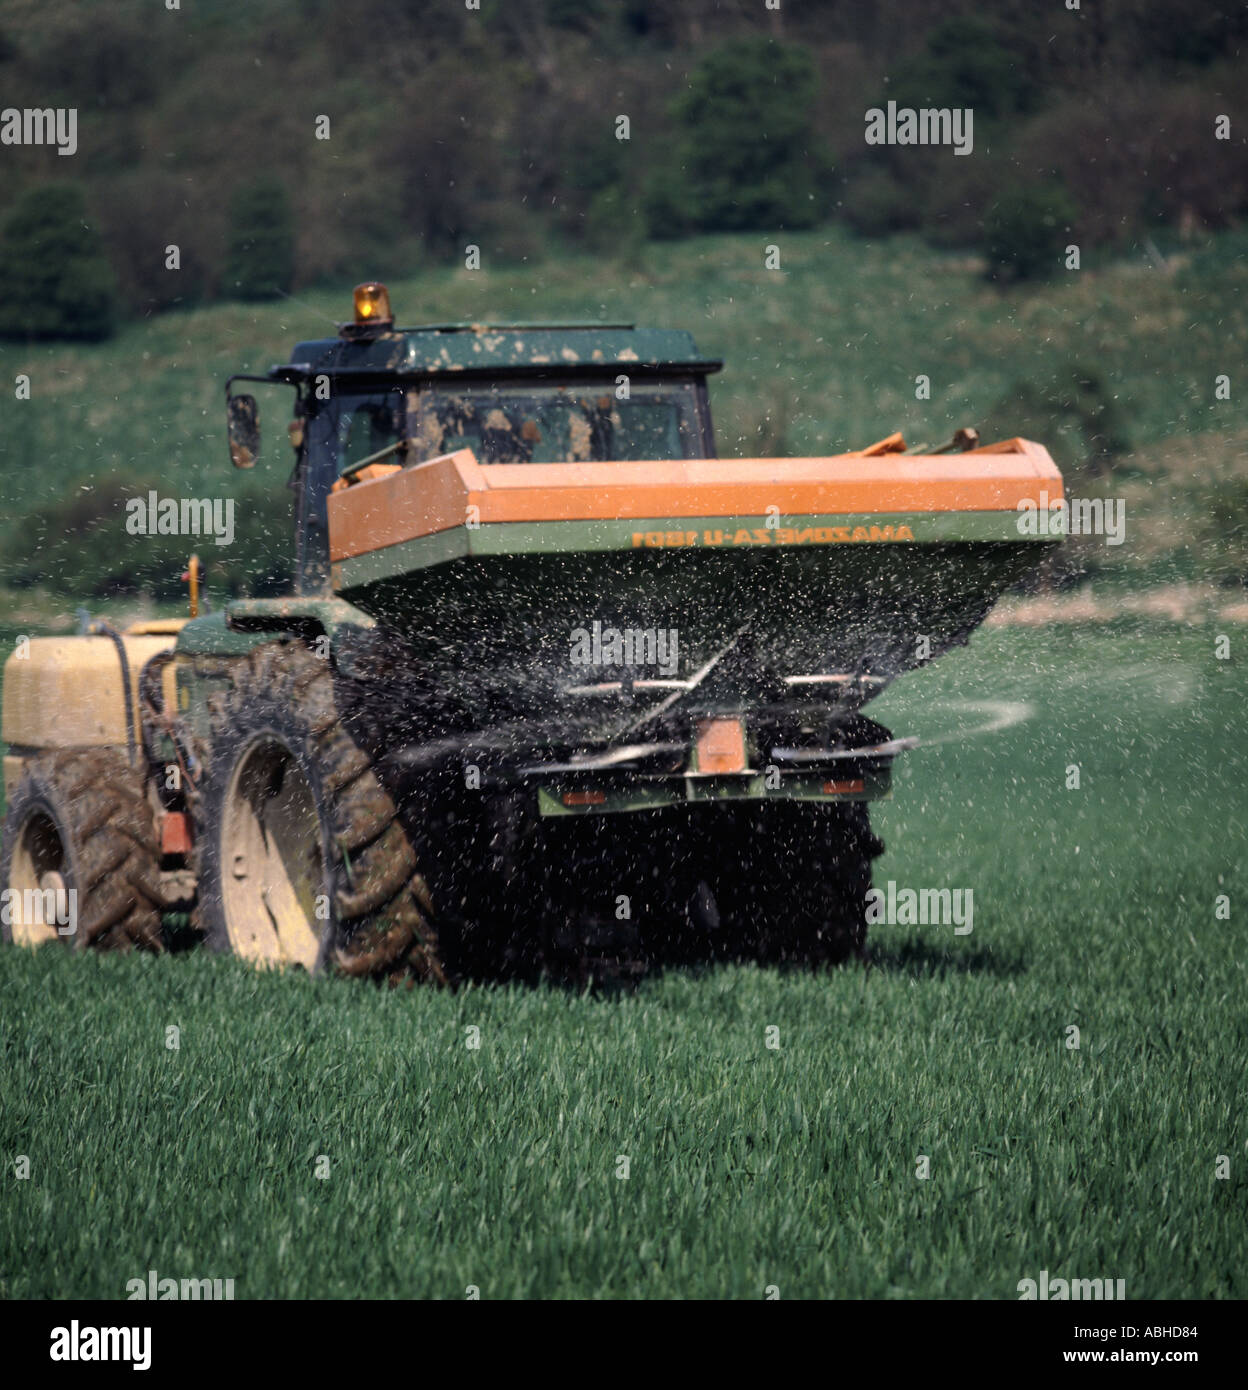 Tractor With Fertilizer Spreader Stockfotos Tractor With